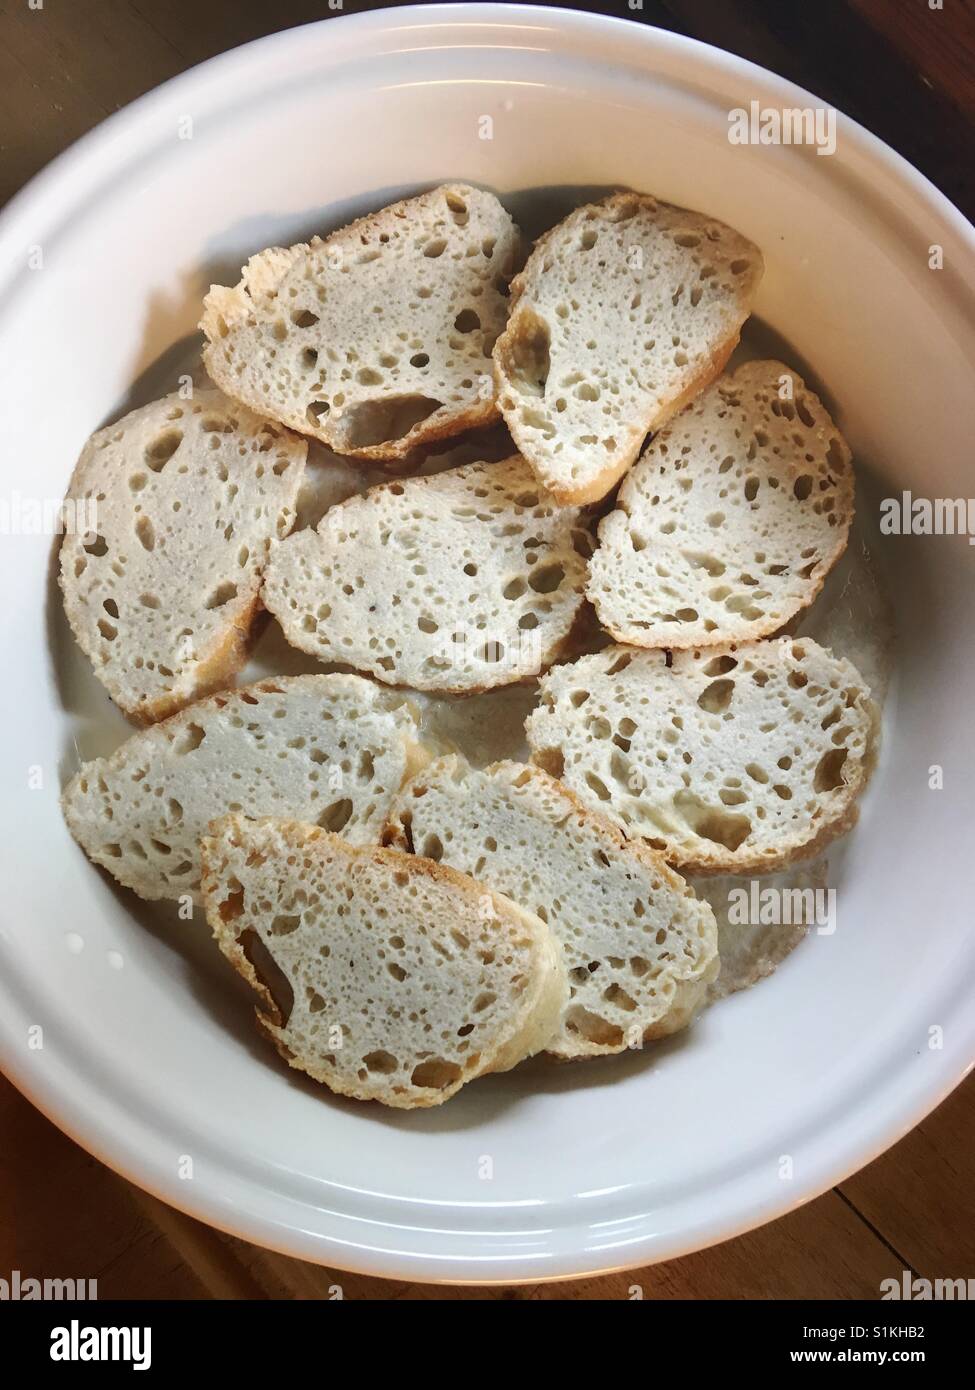 Slices of bread soaked in milk in preparation for french toast Stock Photo